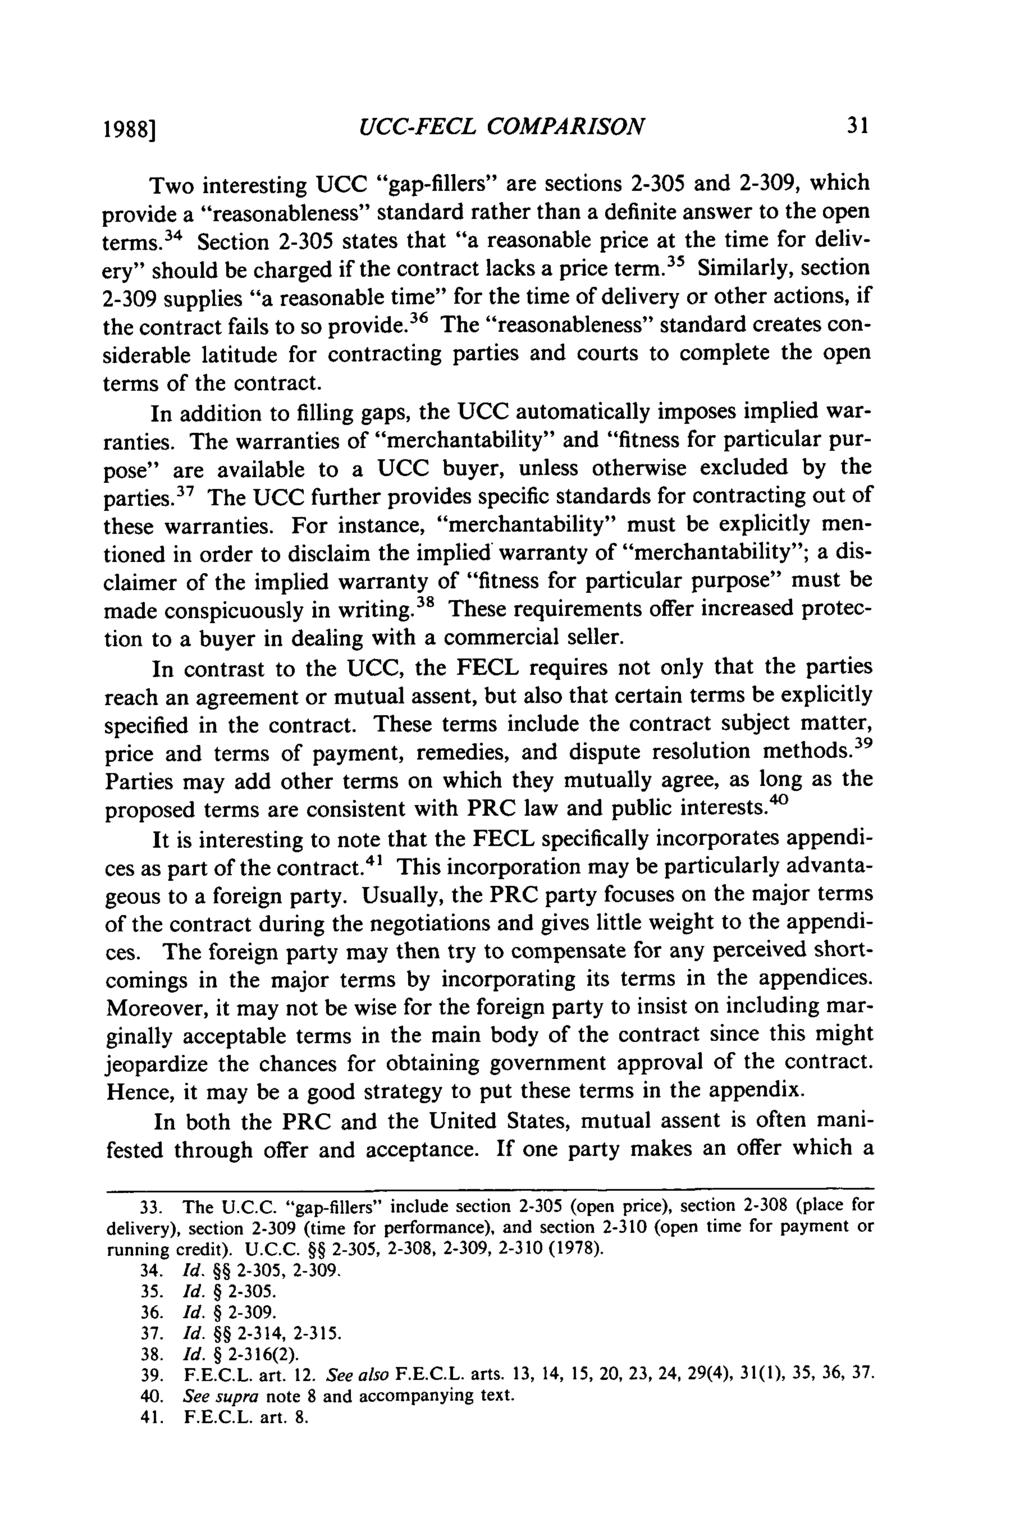 1988] UCC-FECL COMPARISON Two interesting UCC "gap-fillers" are sections 2-305 and 2-309, which provide a "reasonableness" standard rather than a definite answer to the open terms.